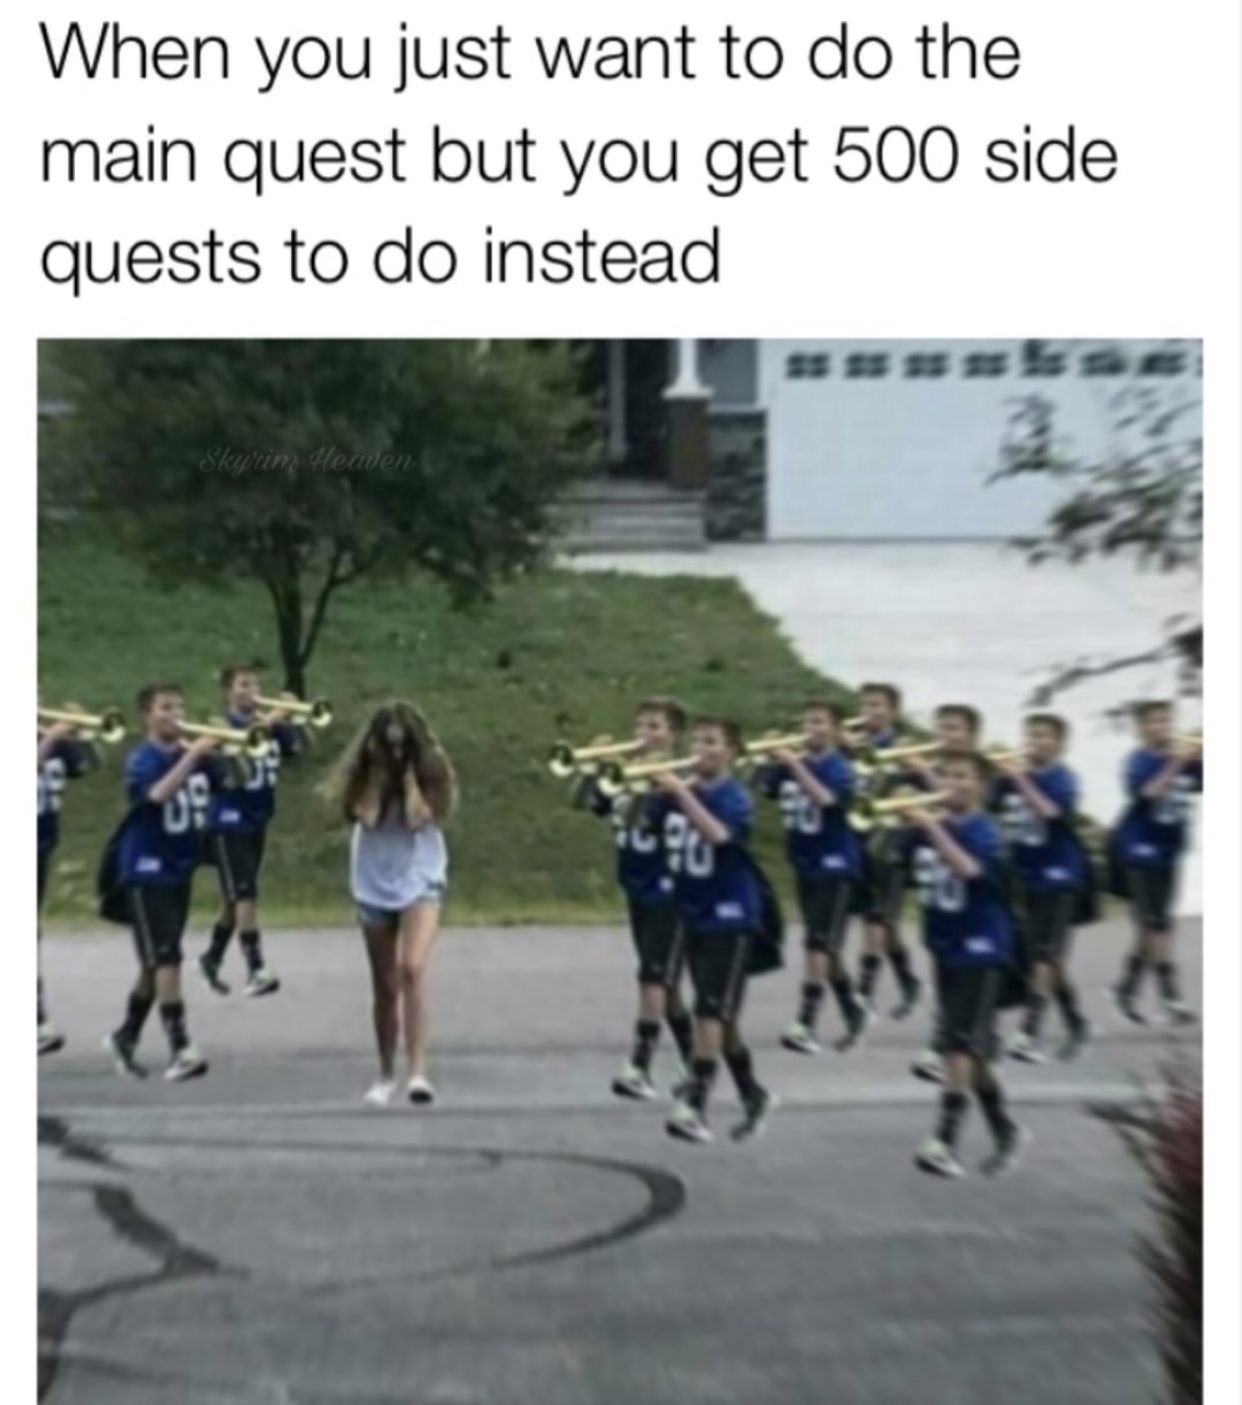 boy blowing trumpet at girl meme - When you just want to do the main quest but you get 500 side quests to do instead Ss Ss Ss Ss Skiptim Heaven